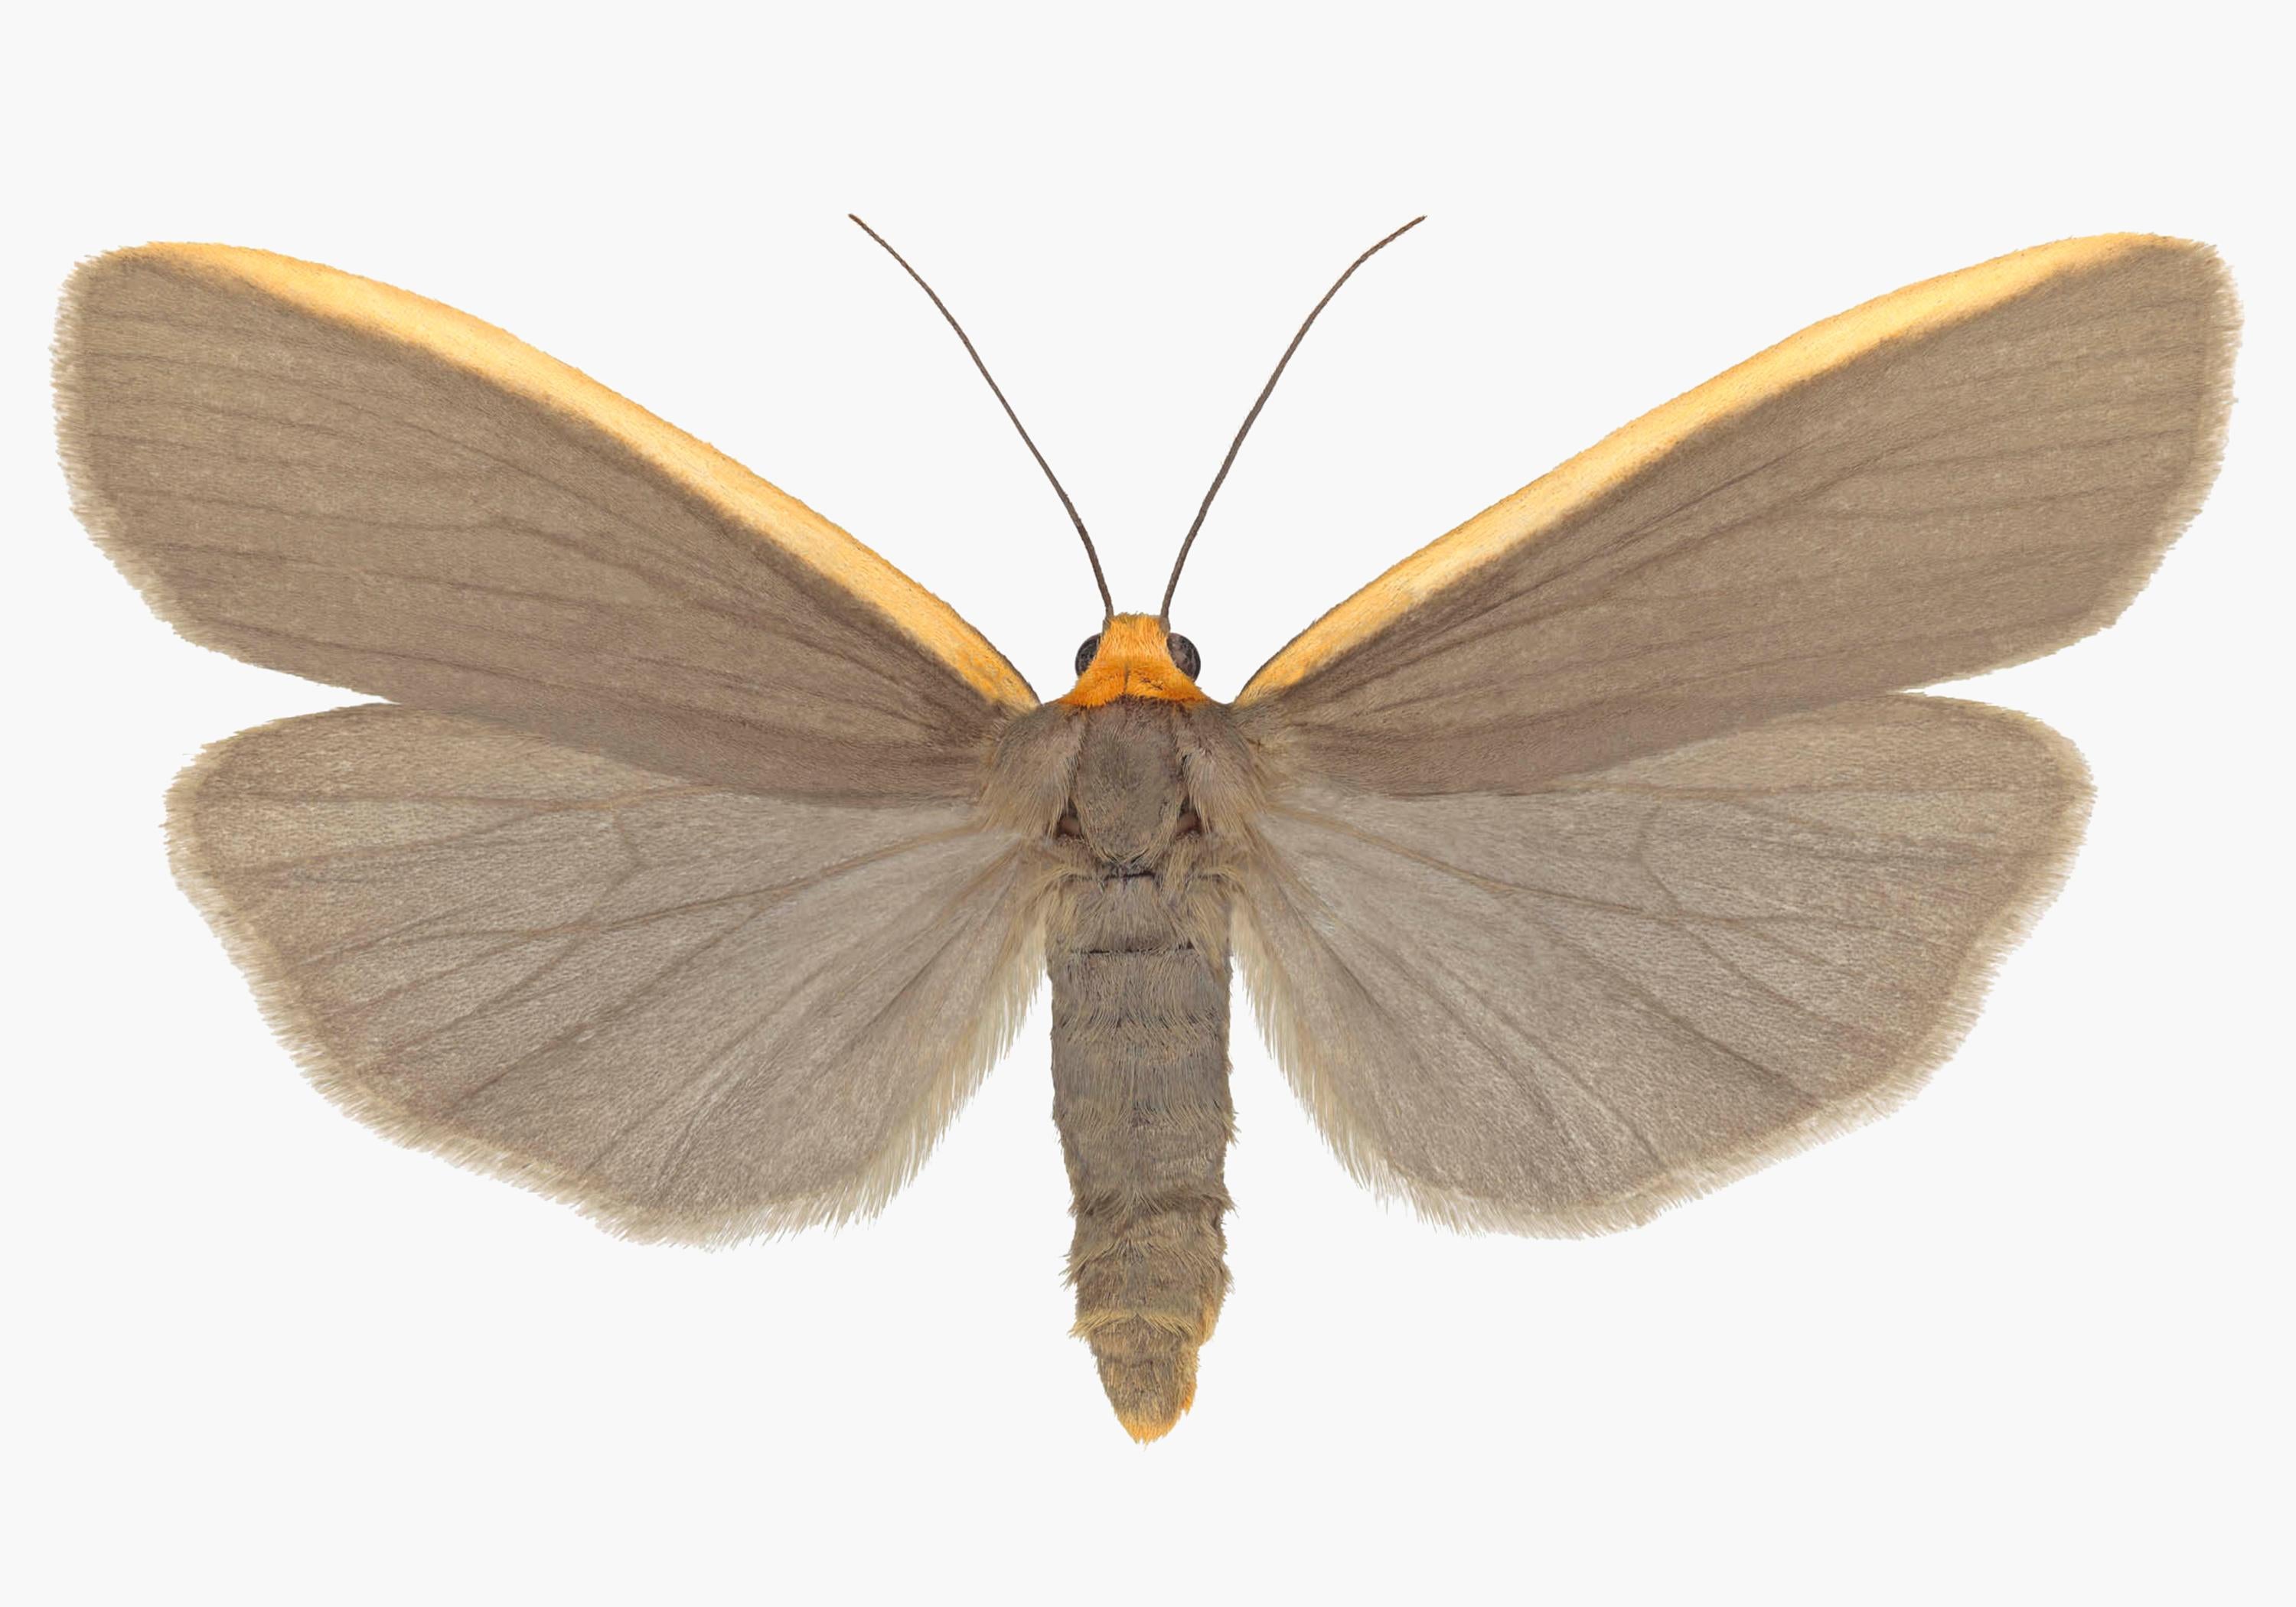 Joseph Scheer Color Photograph - Ghoria Gigantea, Nature Insect Photograph of Light Brown, Orange Moth on White